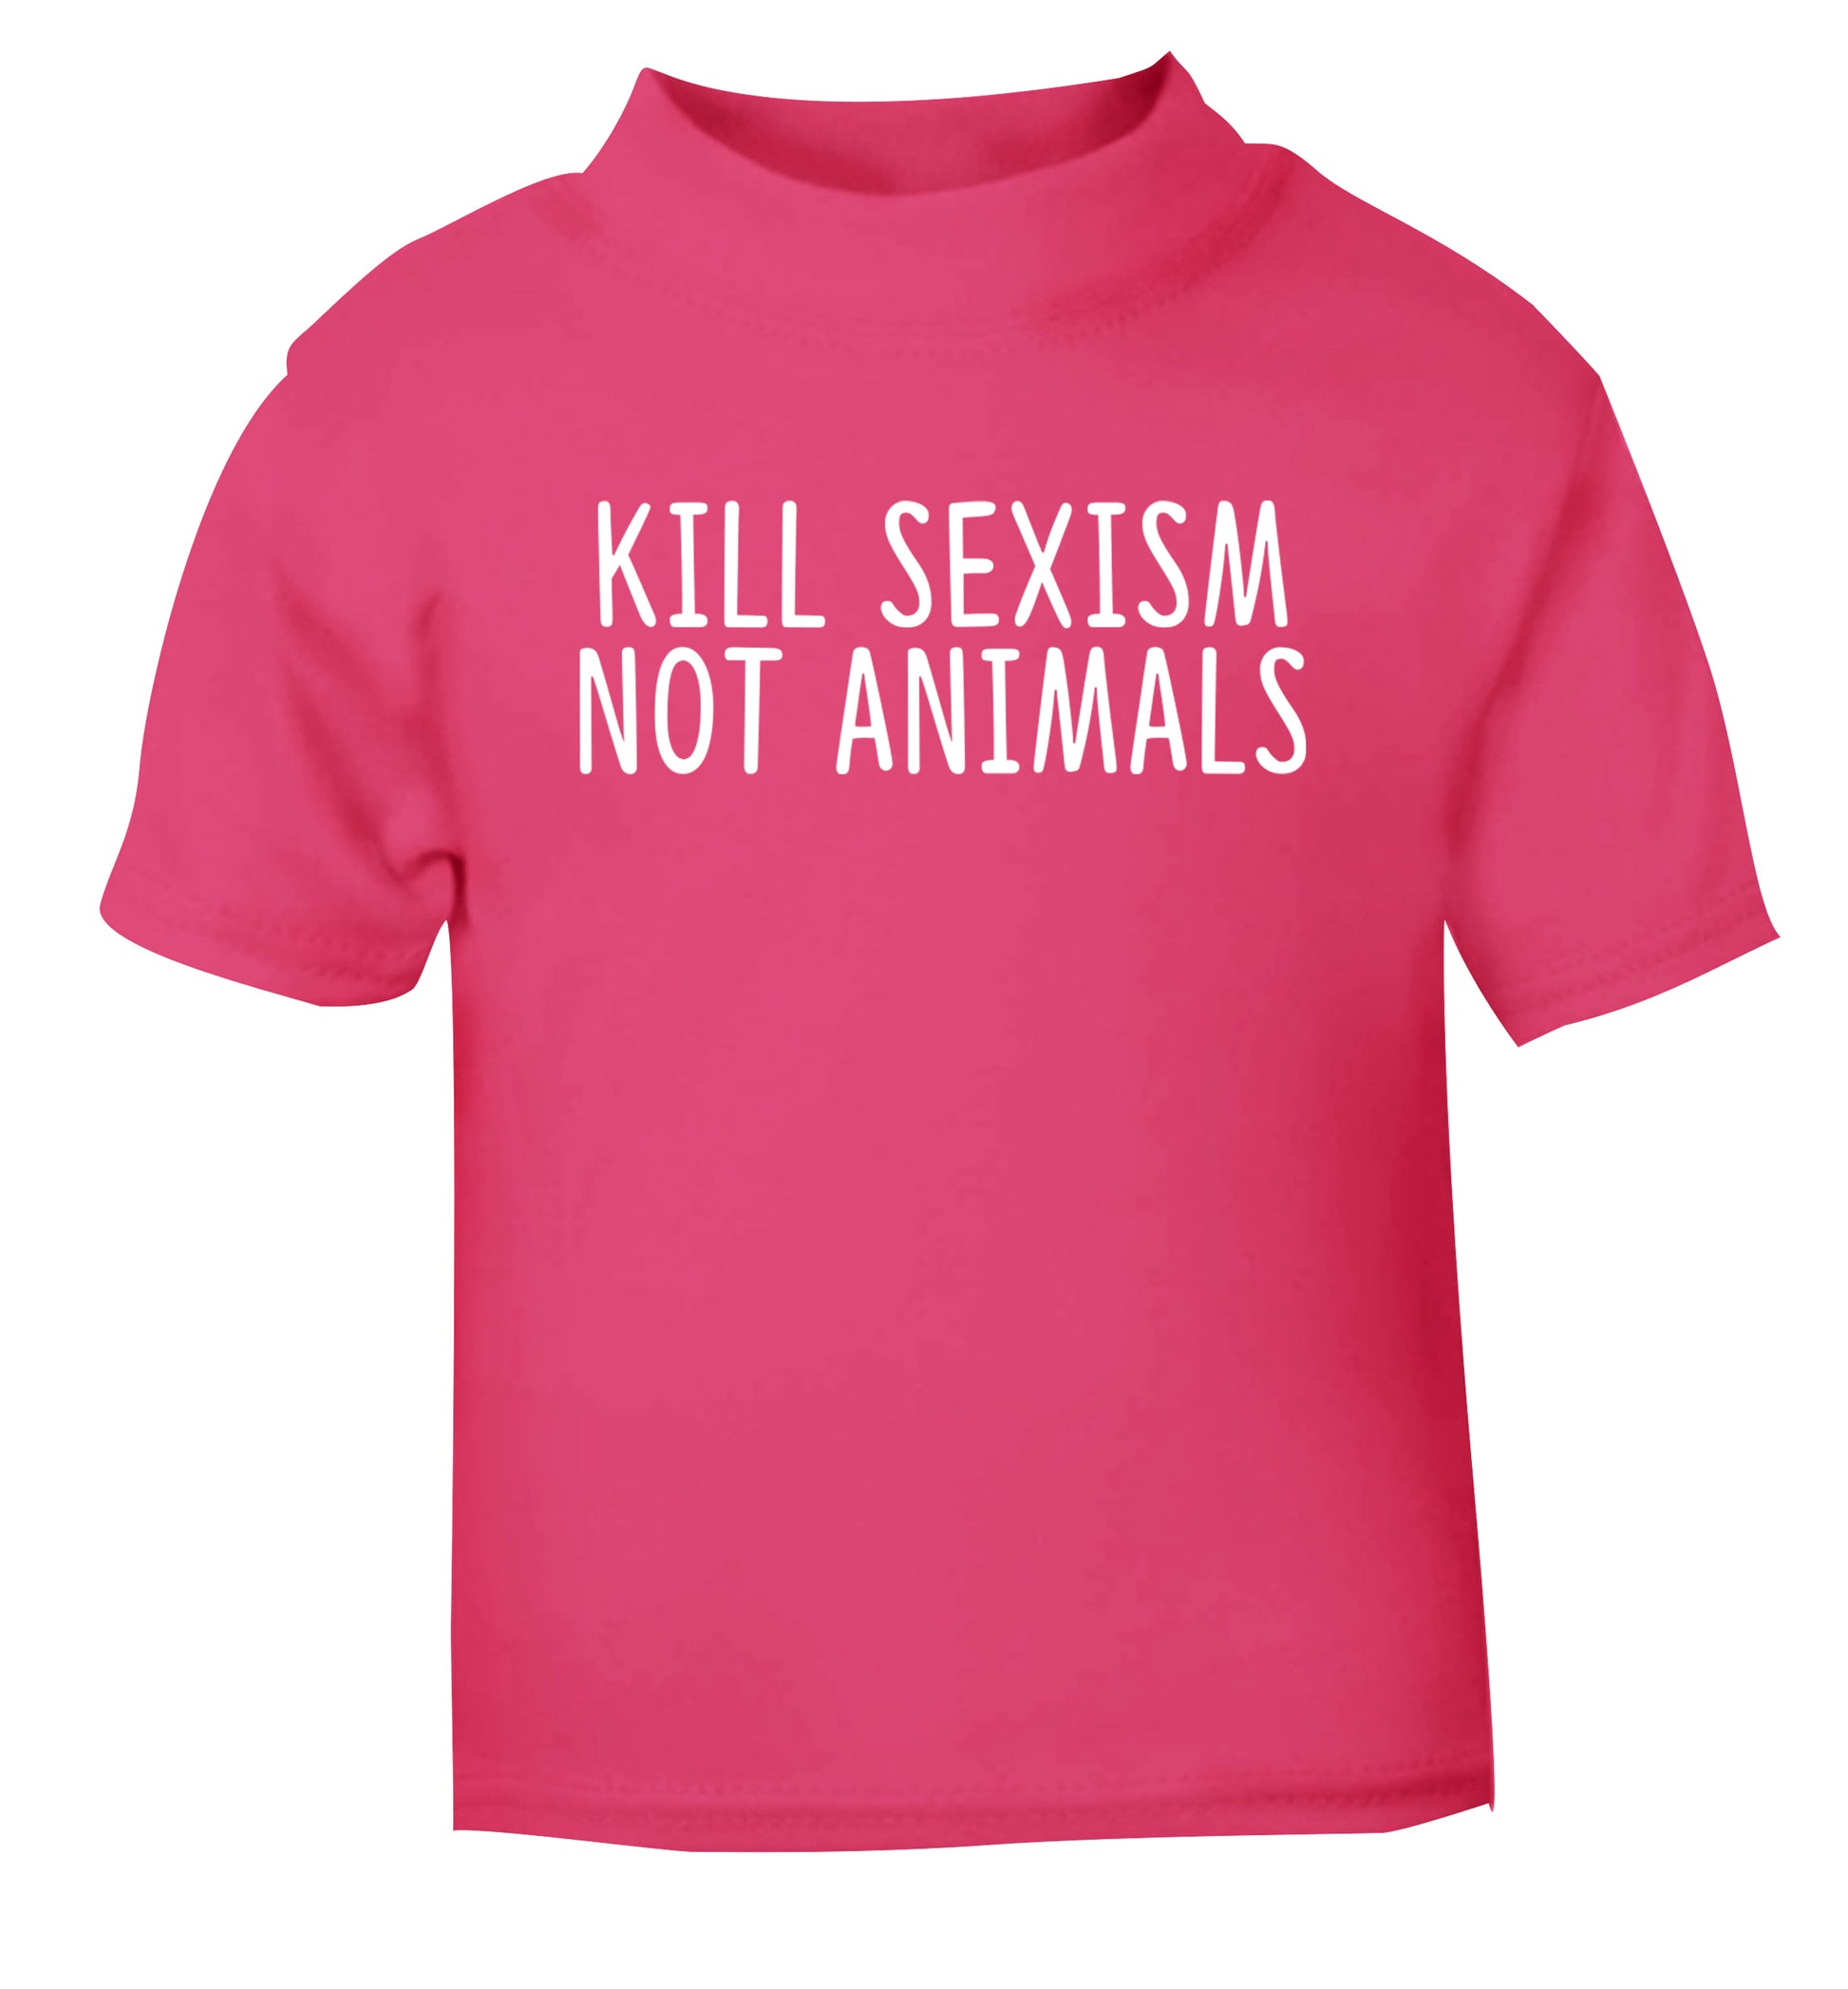 Kill Sexism Not Animals pink Baby Toddler Tshirt 2 Years